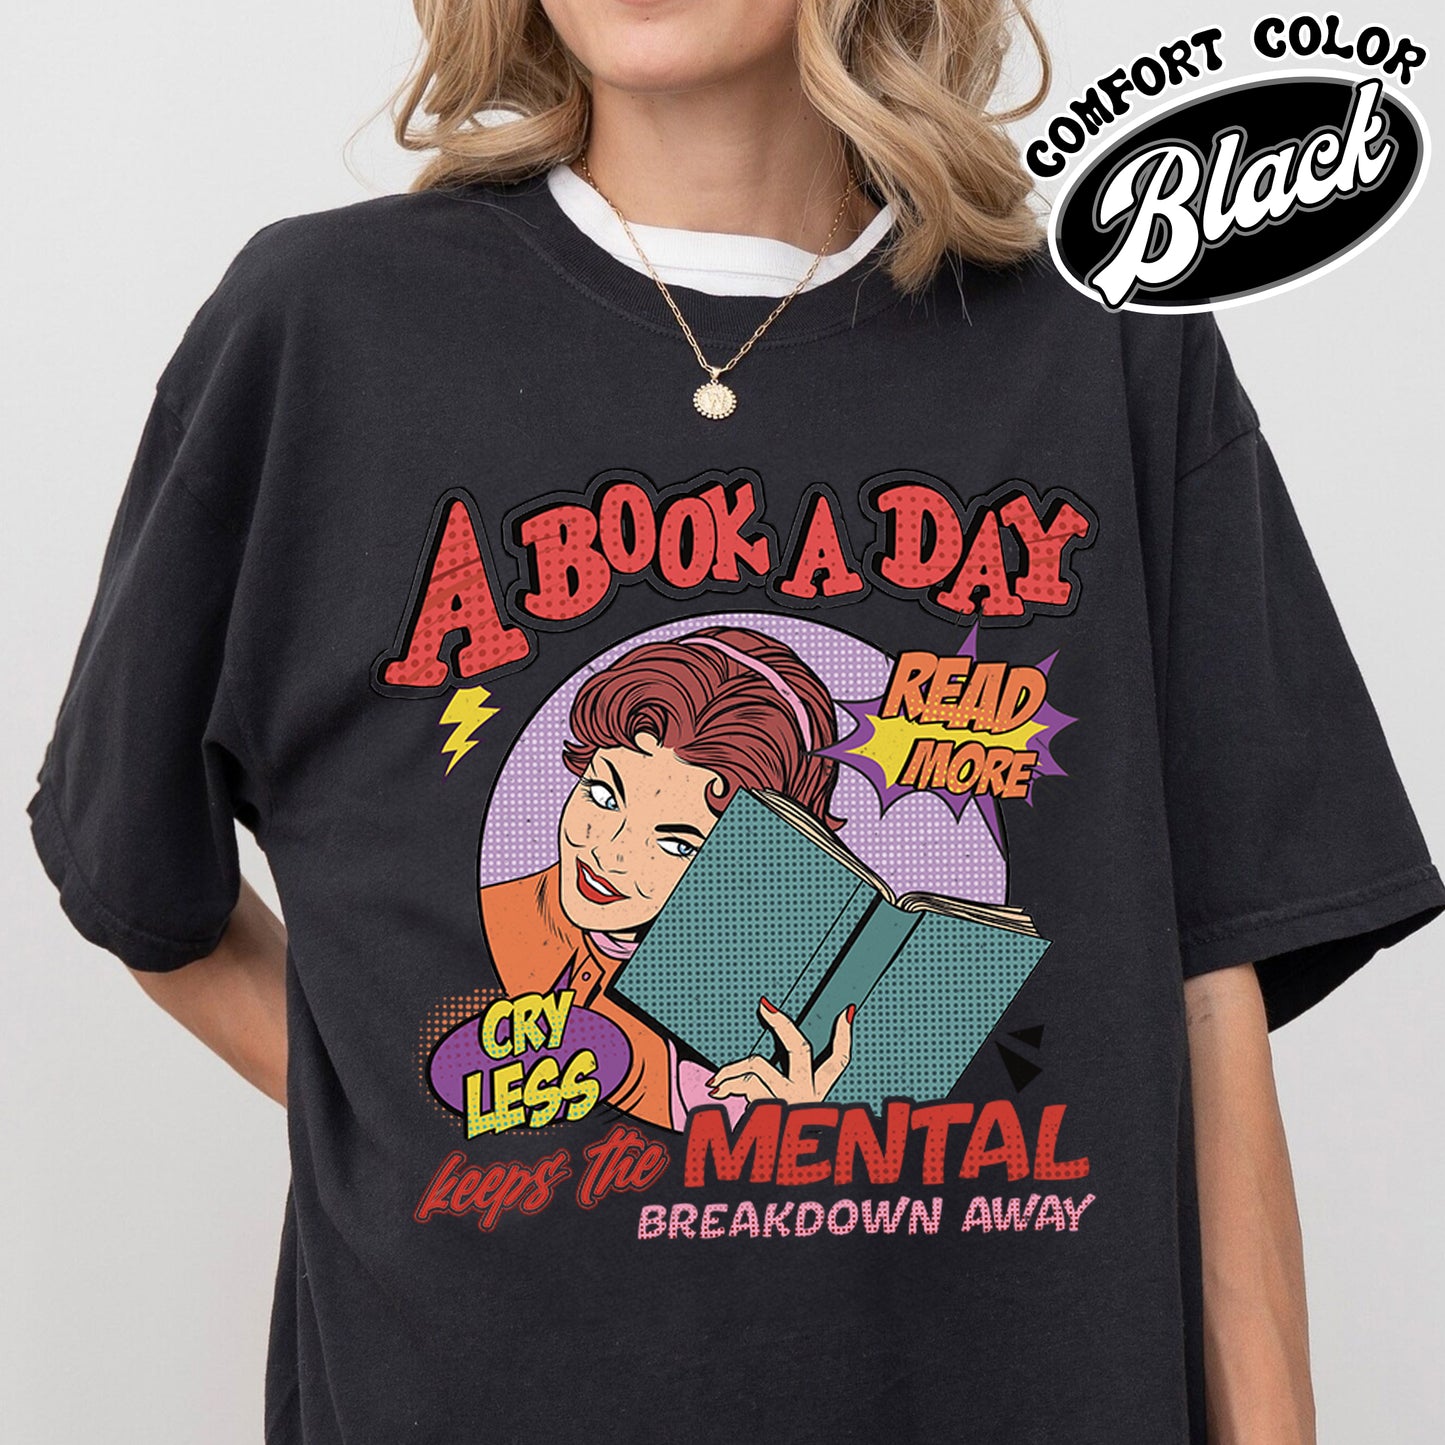 A Book a Day Keep the Mental Breakdown Away Comfort Color Shirt, Book Shirt, Book Gift, Book Lover Gift, a Book a Day Keep the Mental, Book Lover